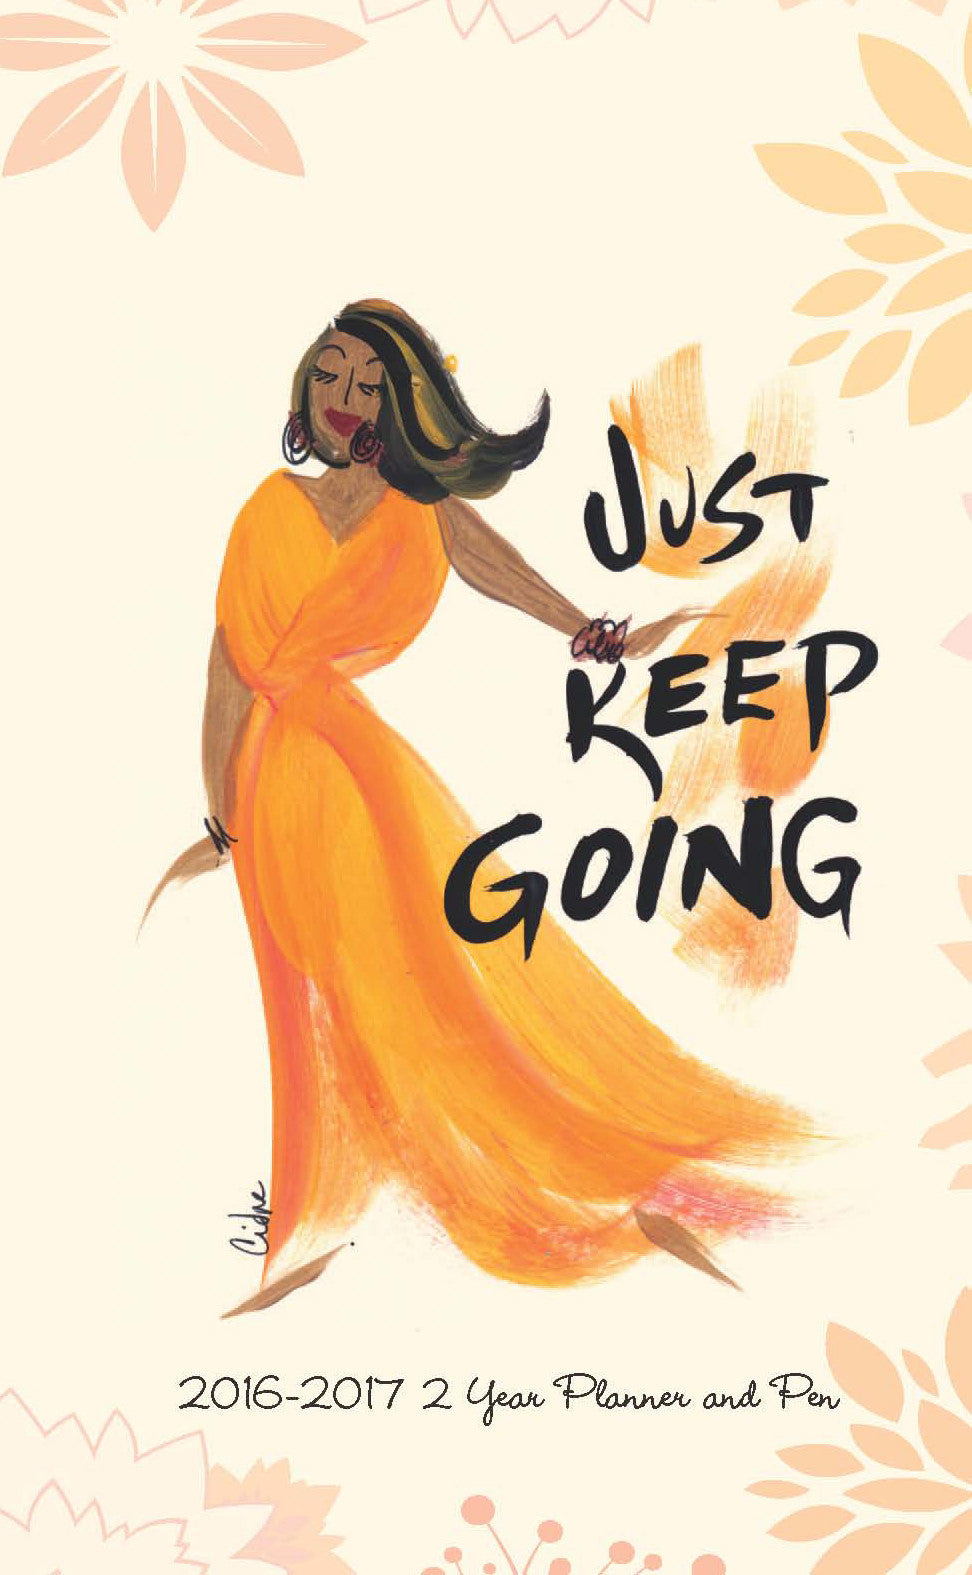 Just Keep Going 2016-2017 African American Checkbook Planner by Cidne Wallace